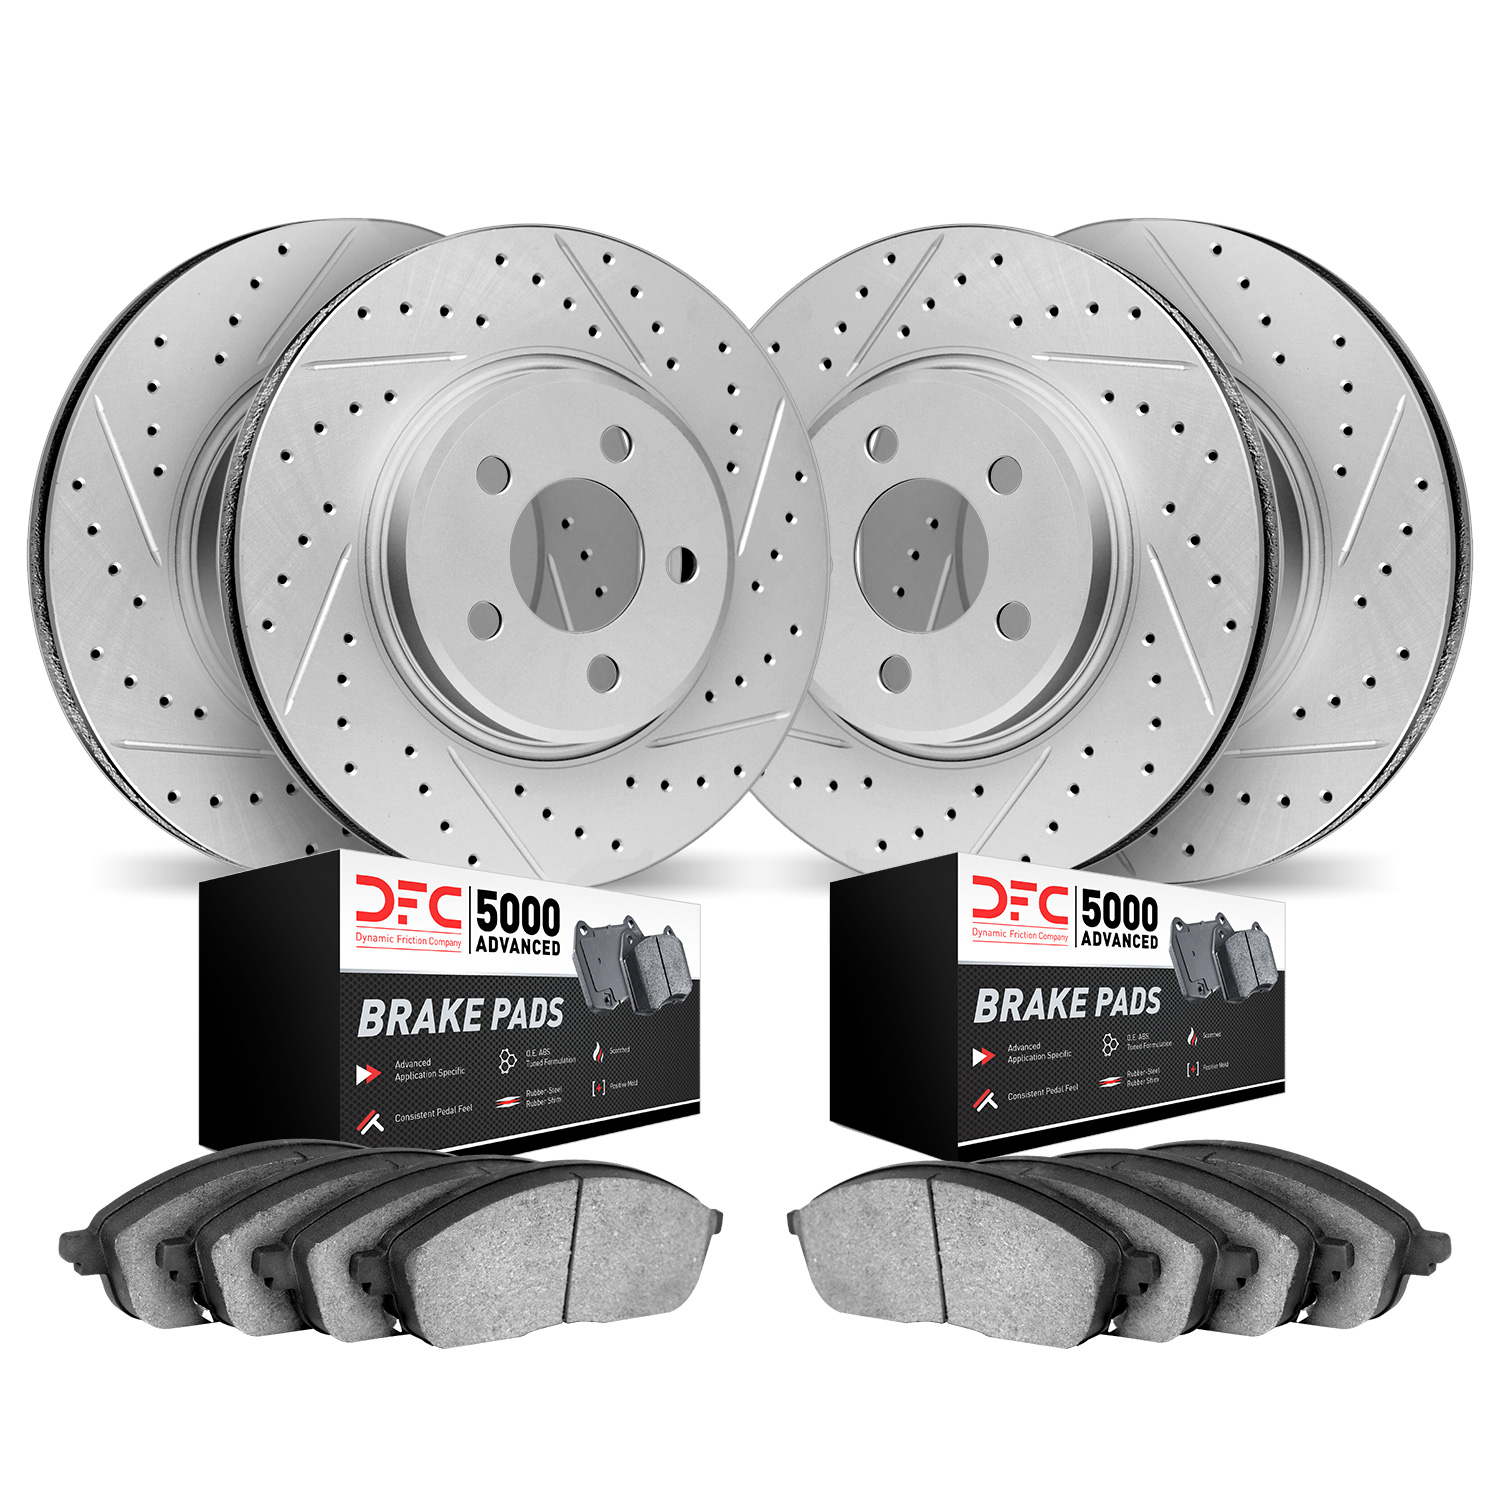 2504-13005 Geoperformance Drilled/Slotted Rotors w/5000 Advanced Brake Pads Kit, 2017-2020 Multiple Makes/Models, Position: Fron